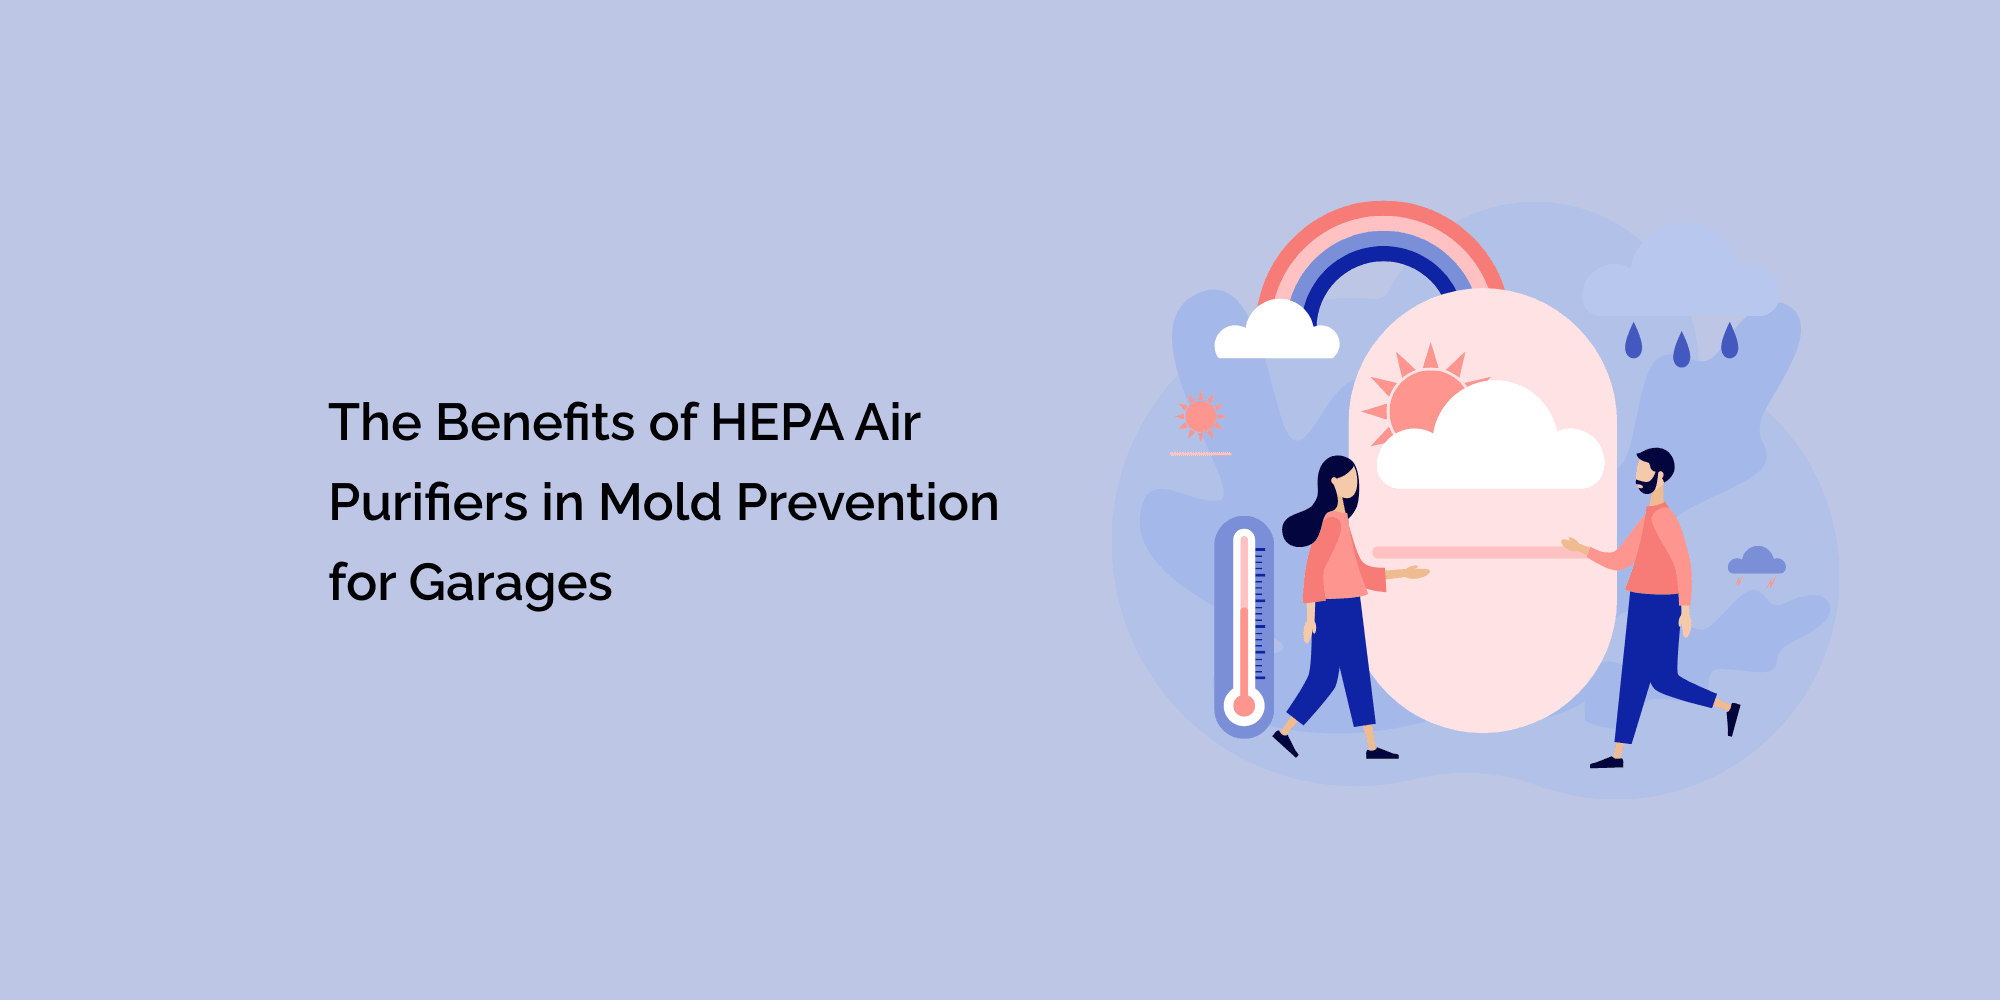 The Benefits of HEPA Air Purifiers in Mold Prevention for Garages